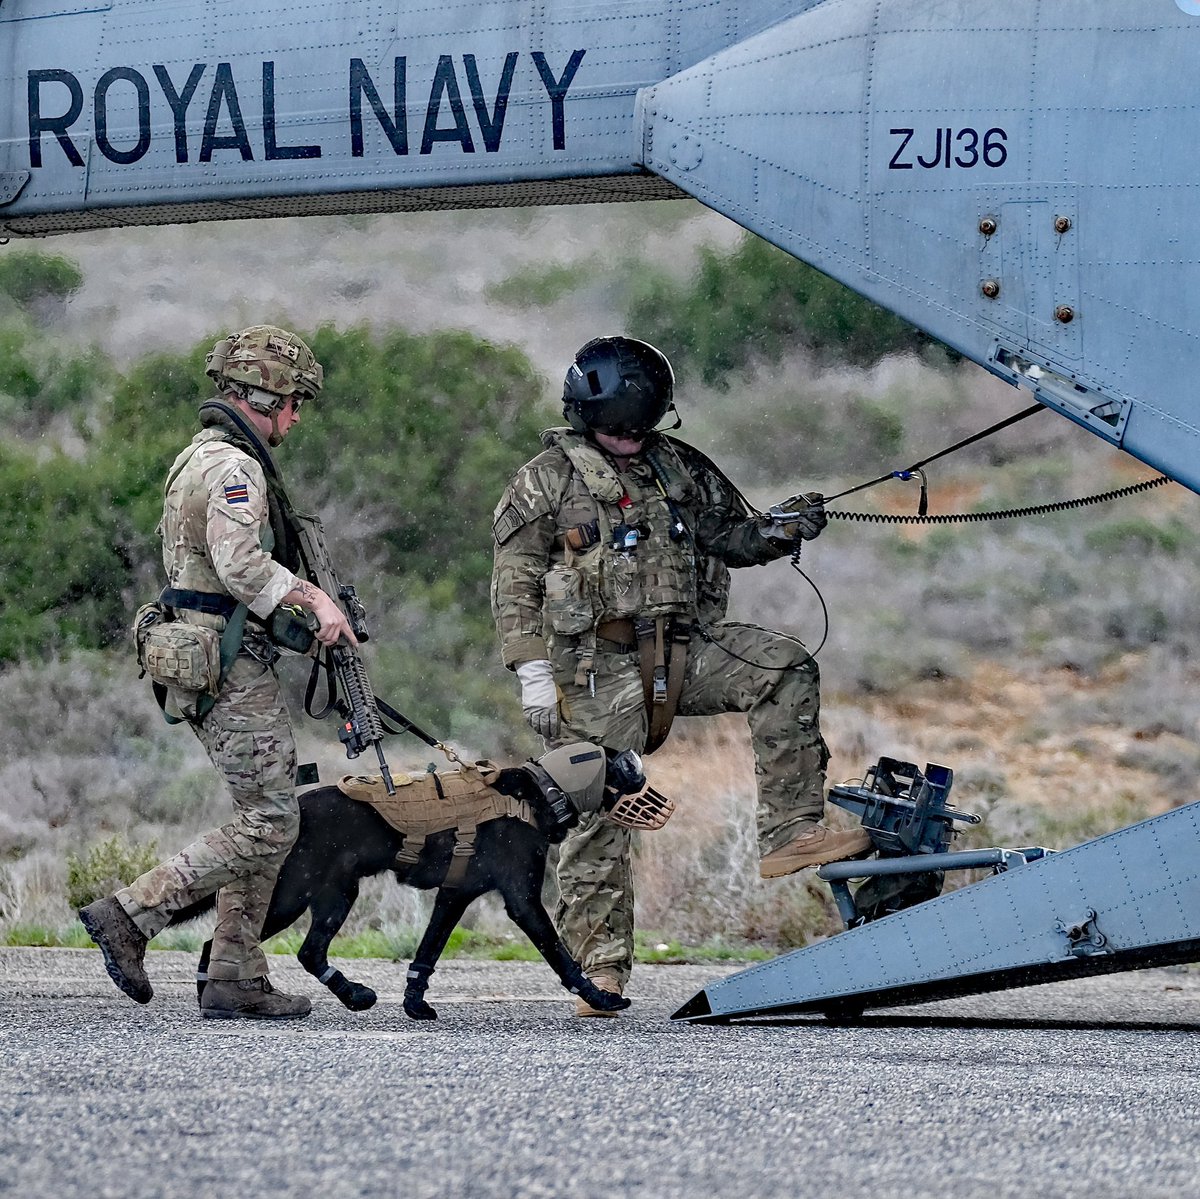 Wednesday Sports Afternoon... Why not get out with the dog? 🐾 #FlyNavy